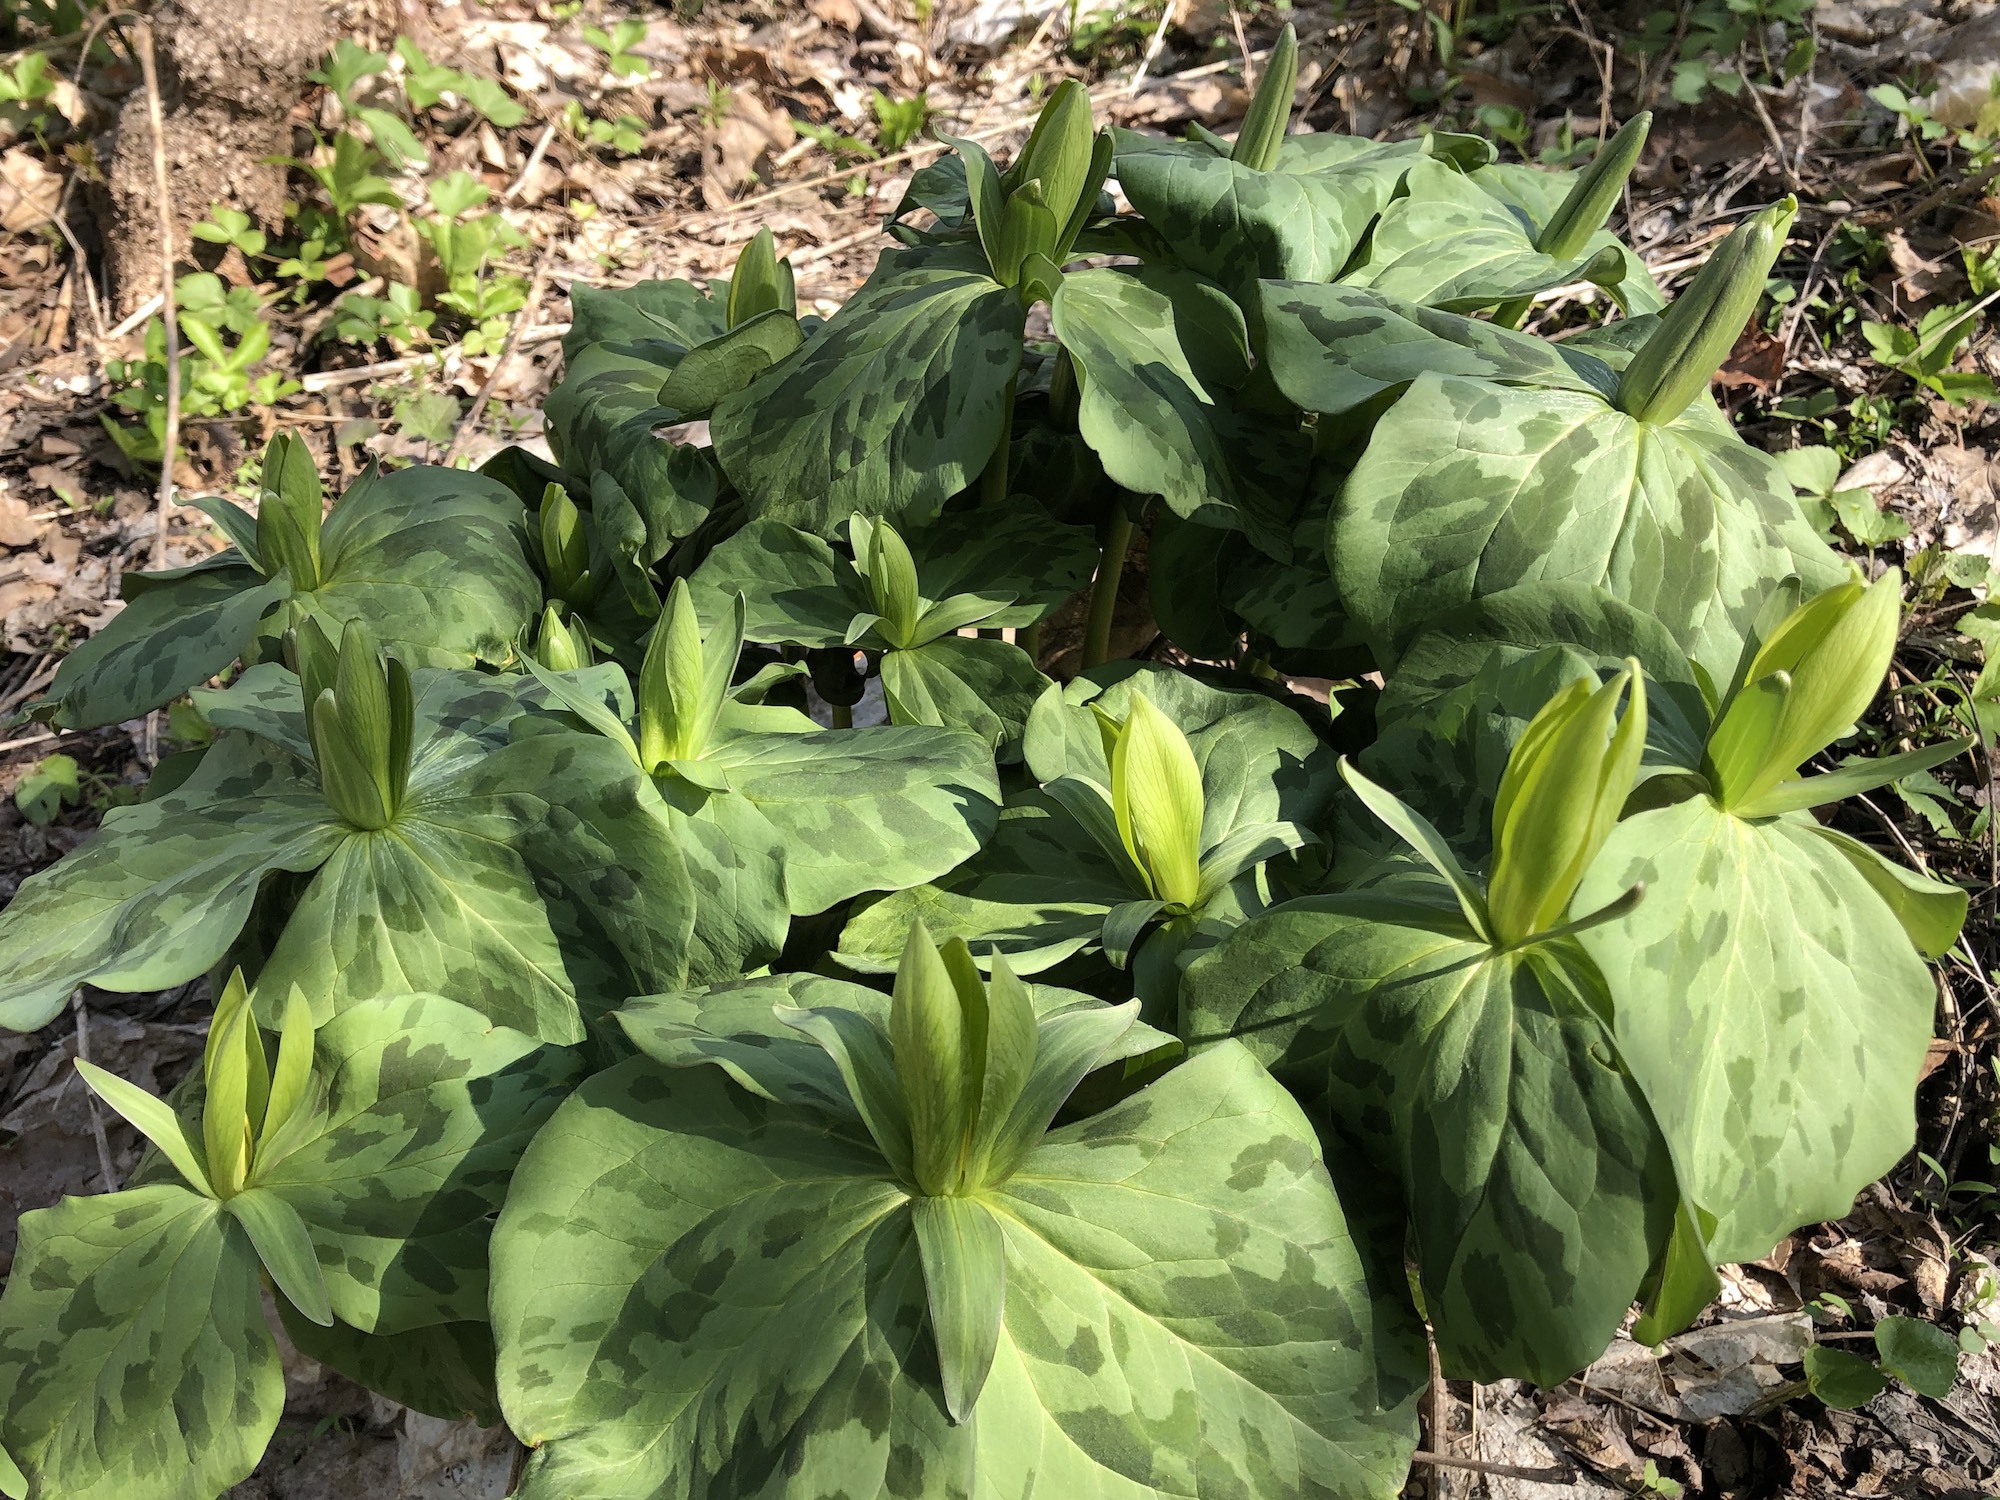 Trillium off of bike path between Marion Dunn and Duck Pond on April 25, 2019.